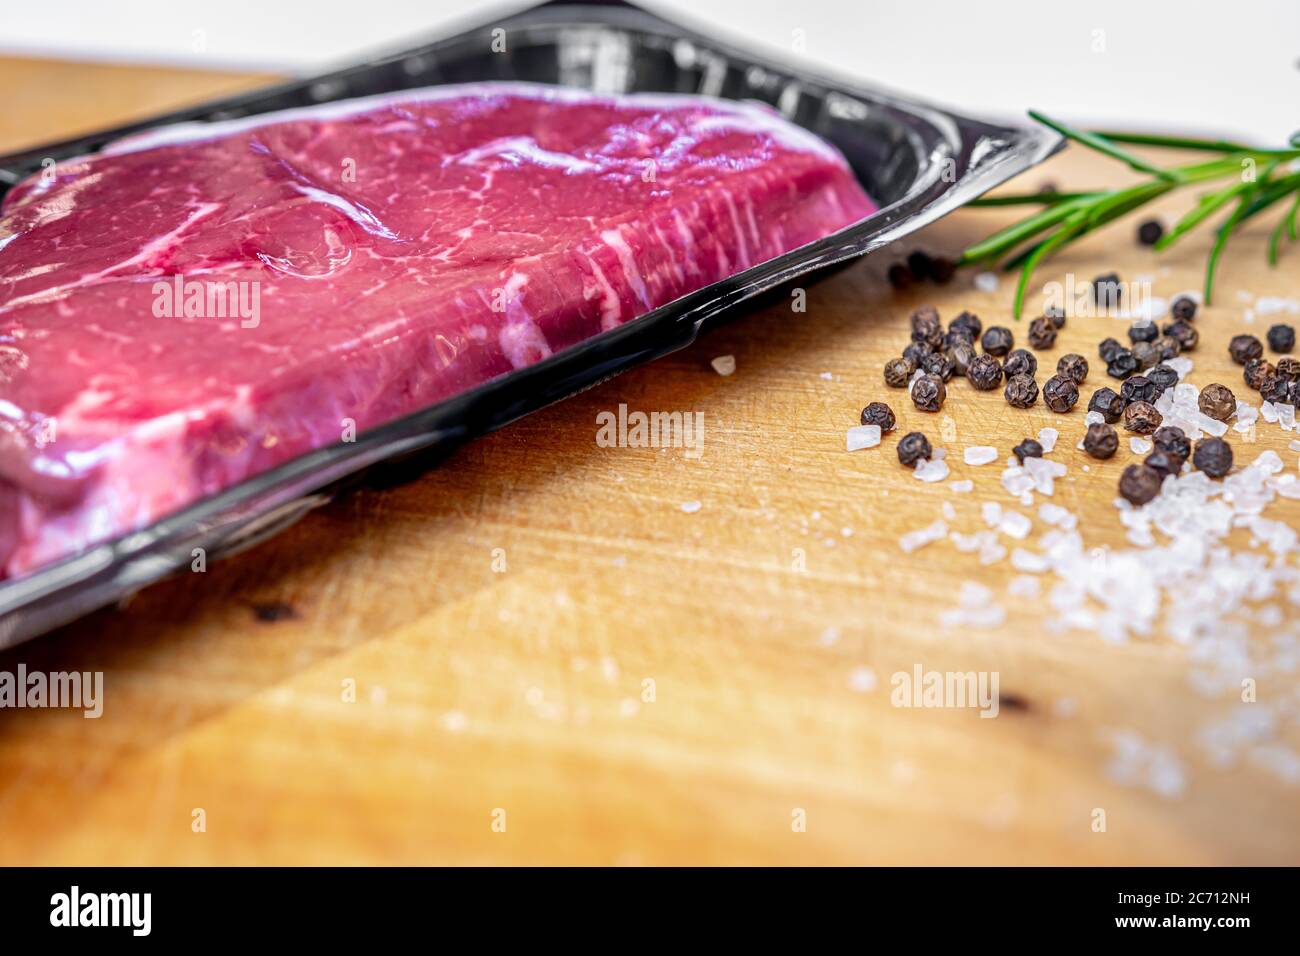 Beef steak in vacuum skin packaging and spices on wooden chopping board with copyspace Stock Photo